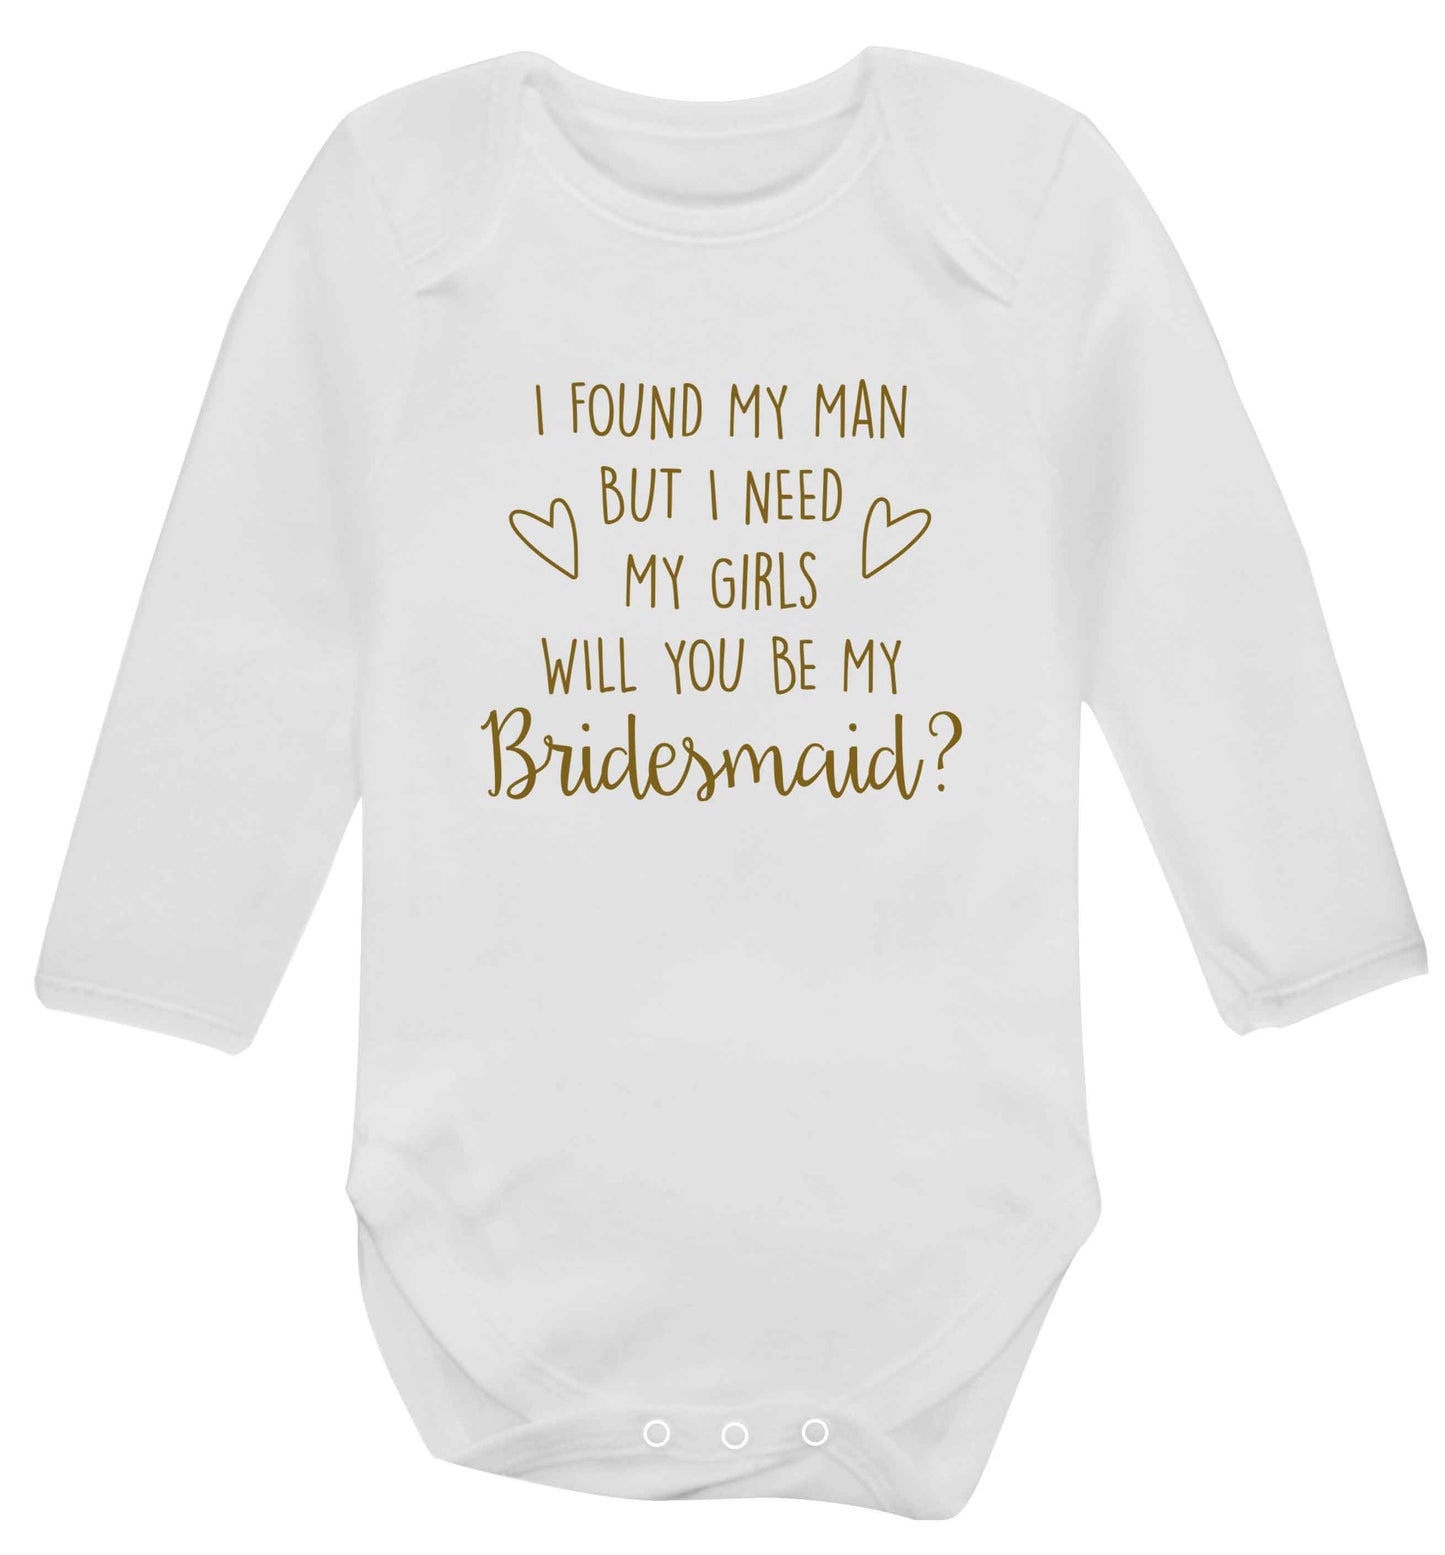 I found my man but I need my girls will you be my bridesmaid? baby vest long sleeved white 6-12 months